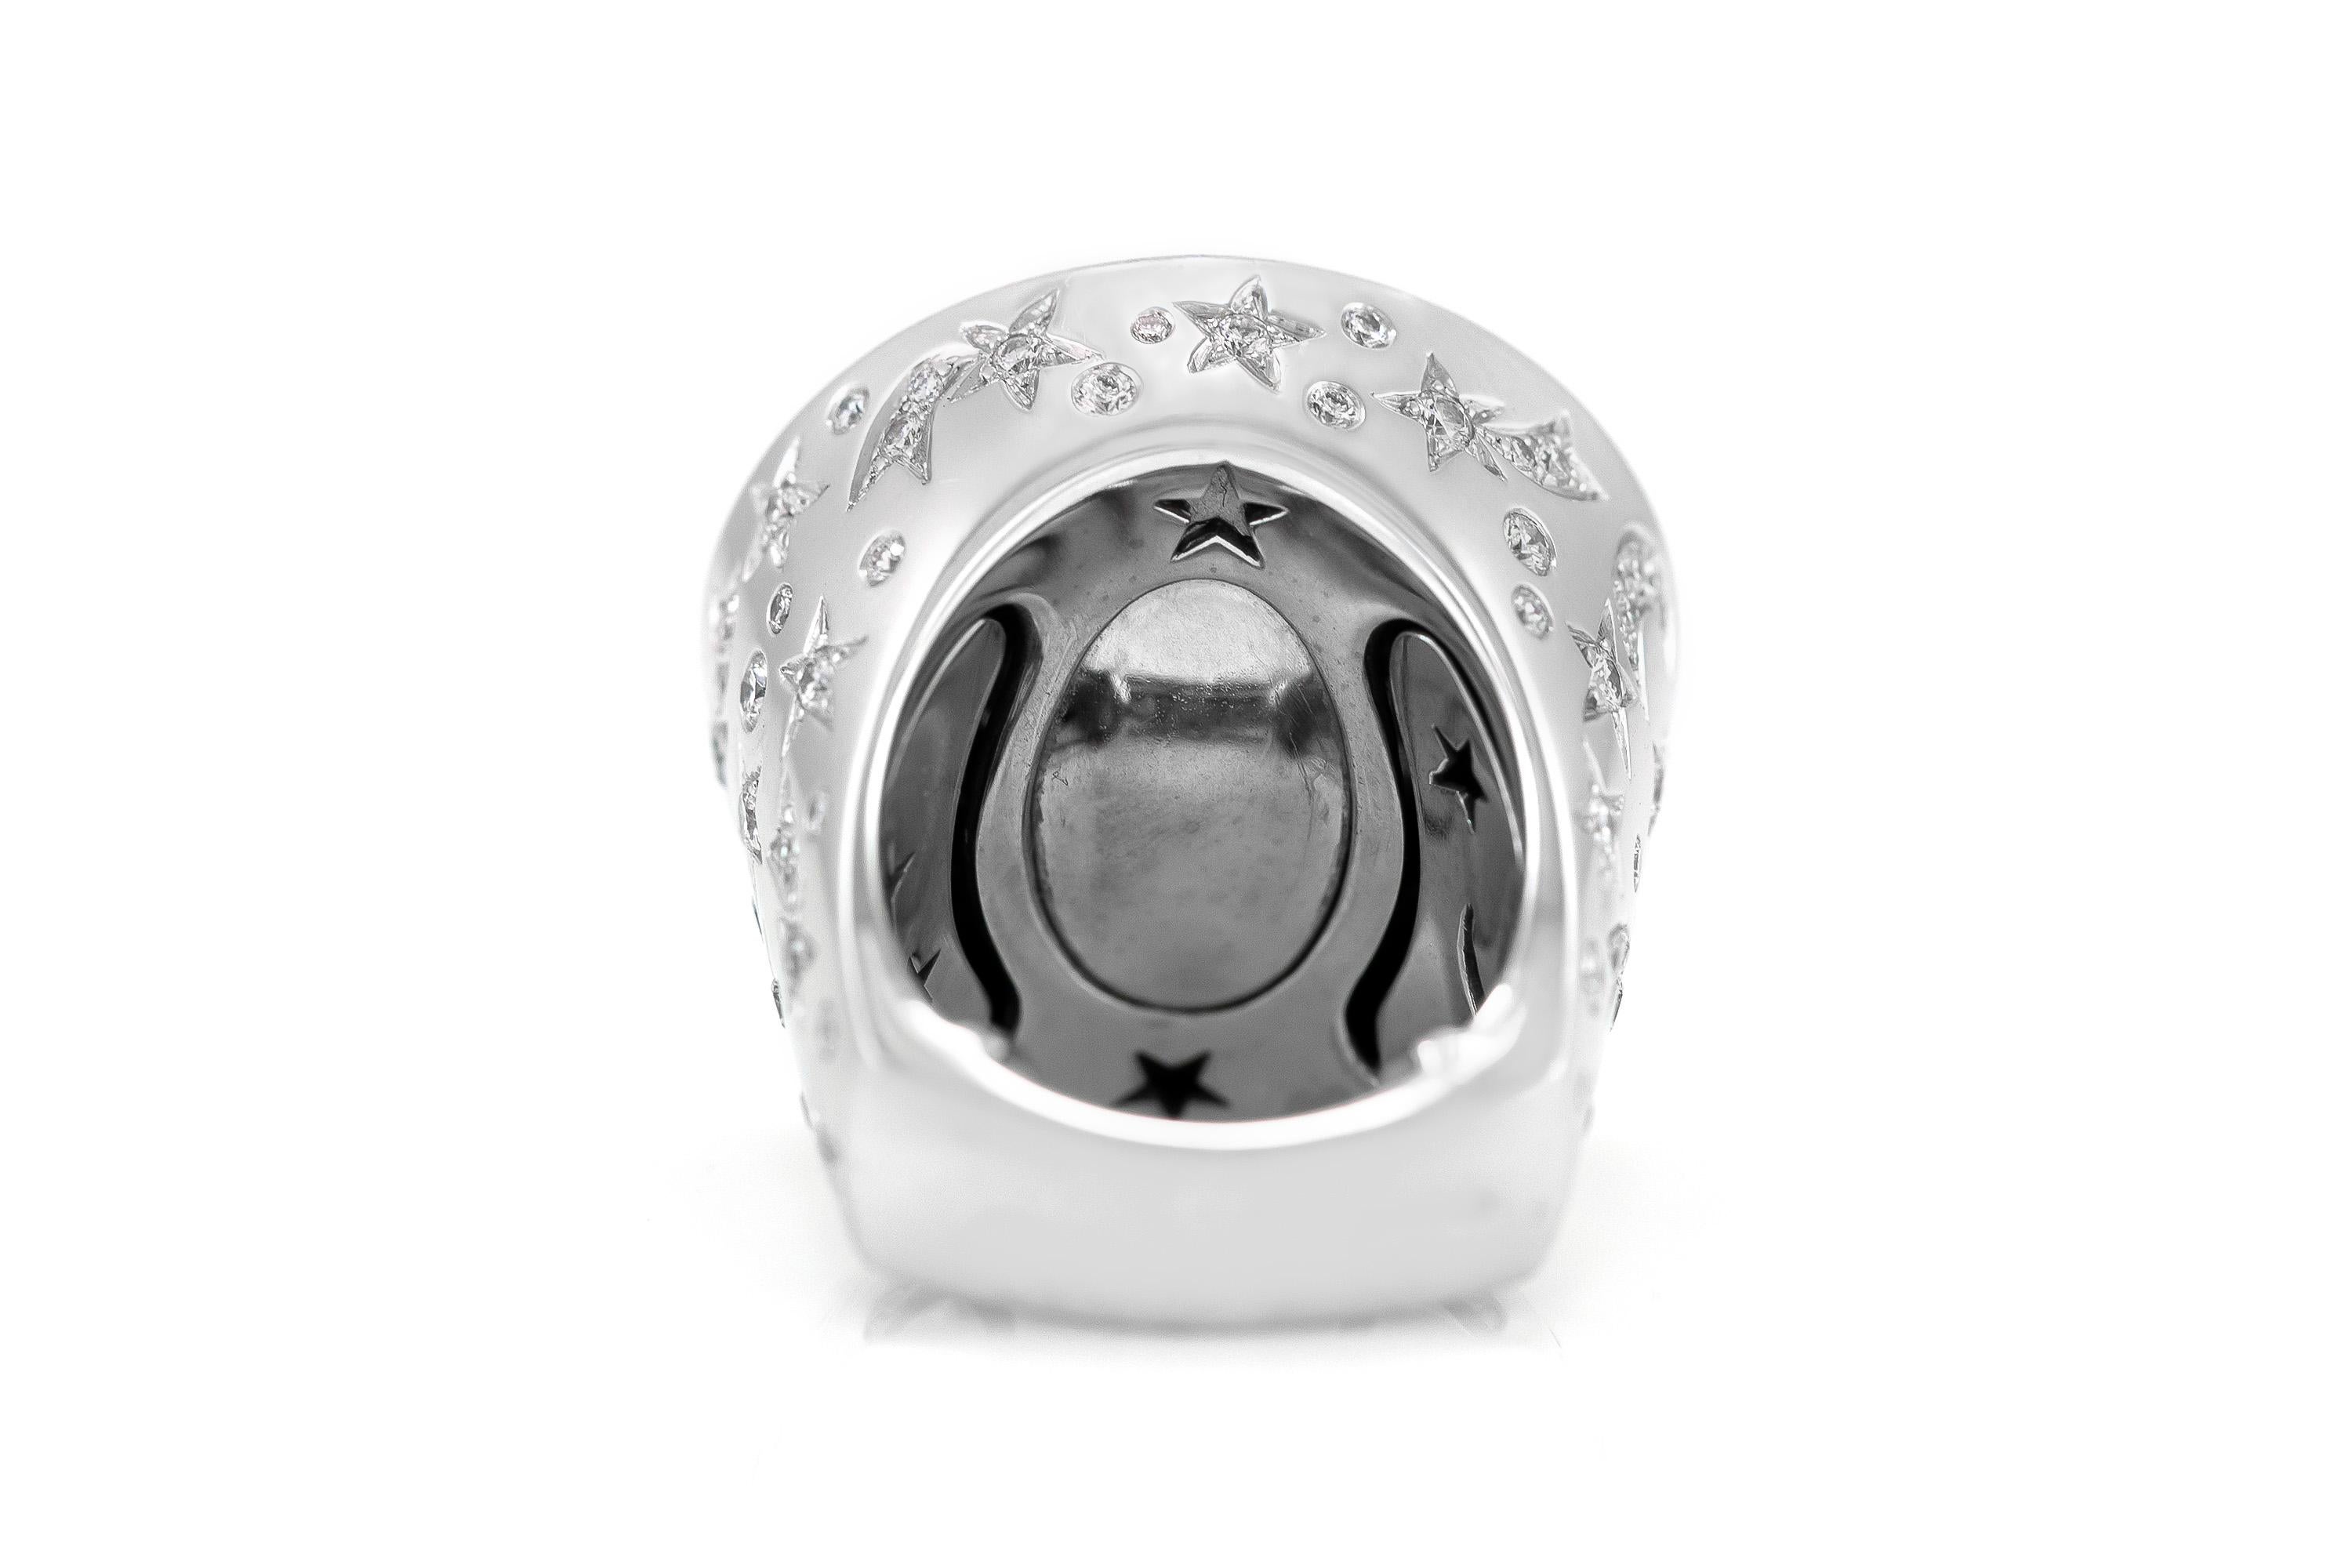 The beautiful chanel ring is finely crafted in 18k white gold with diamonds weighing approximately total of 1.72 and sapphires weighing approximately total of 5.67 carat.
Beautiful ring from the 